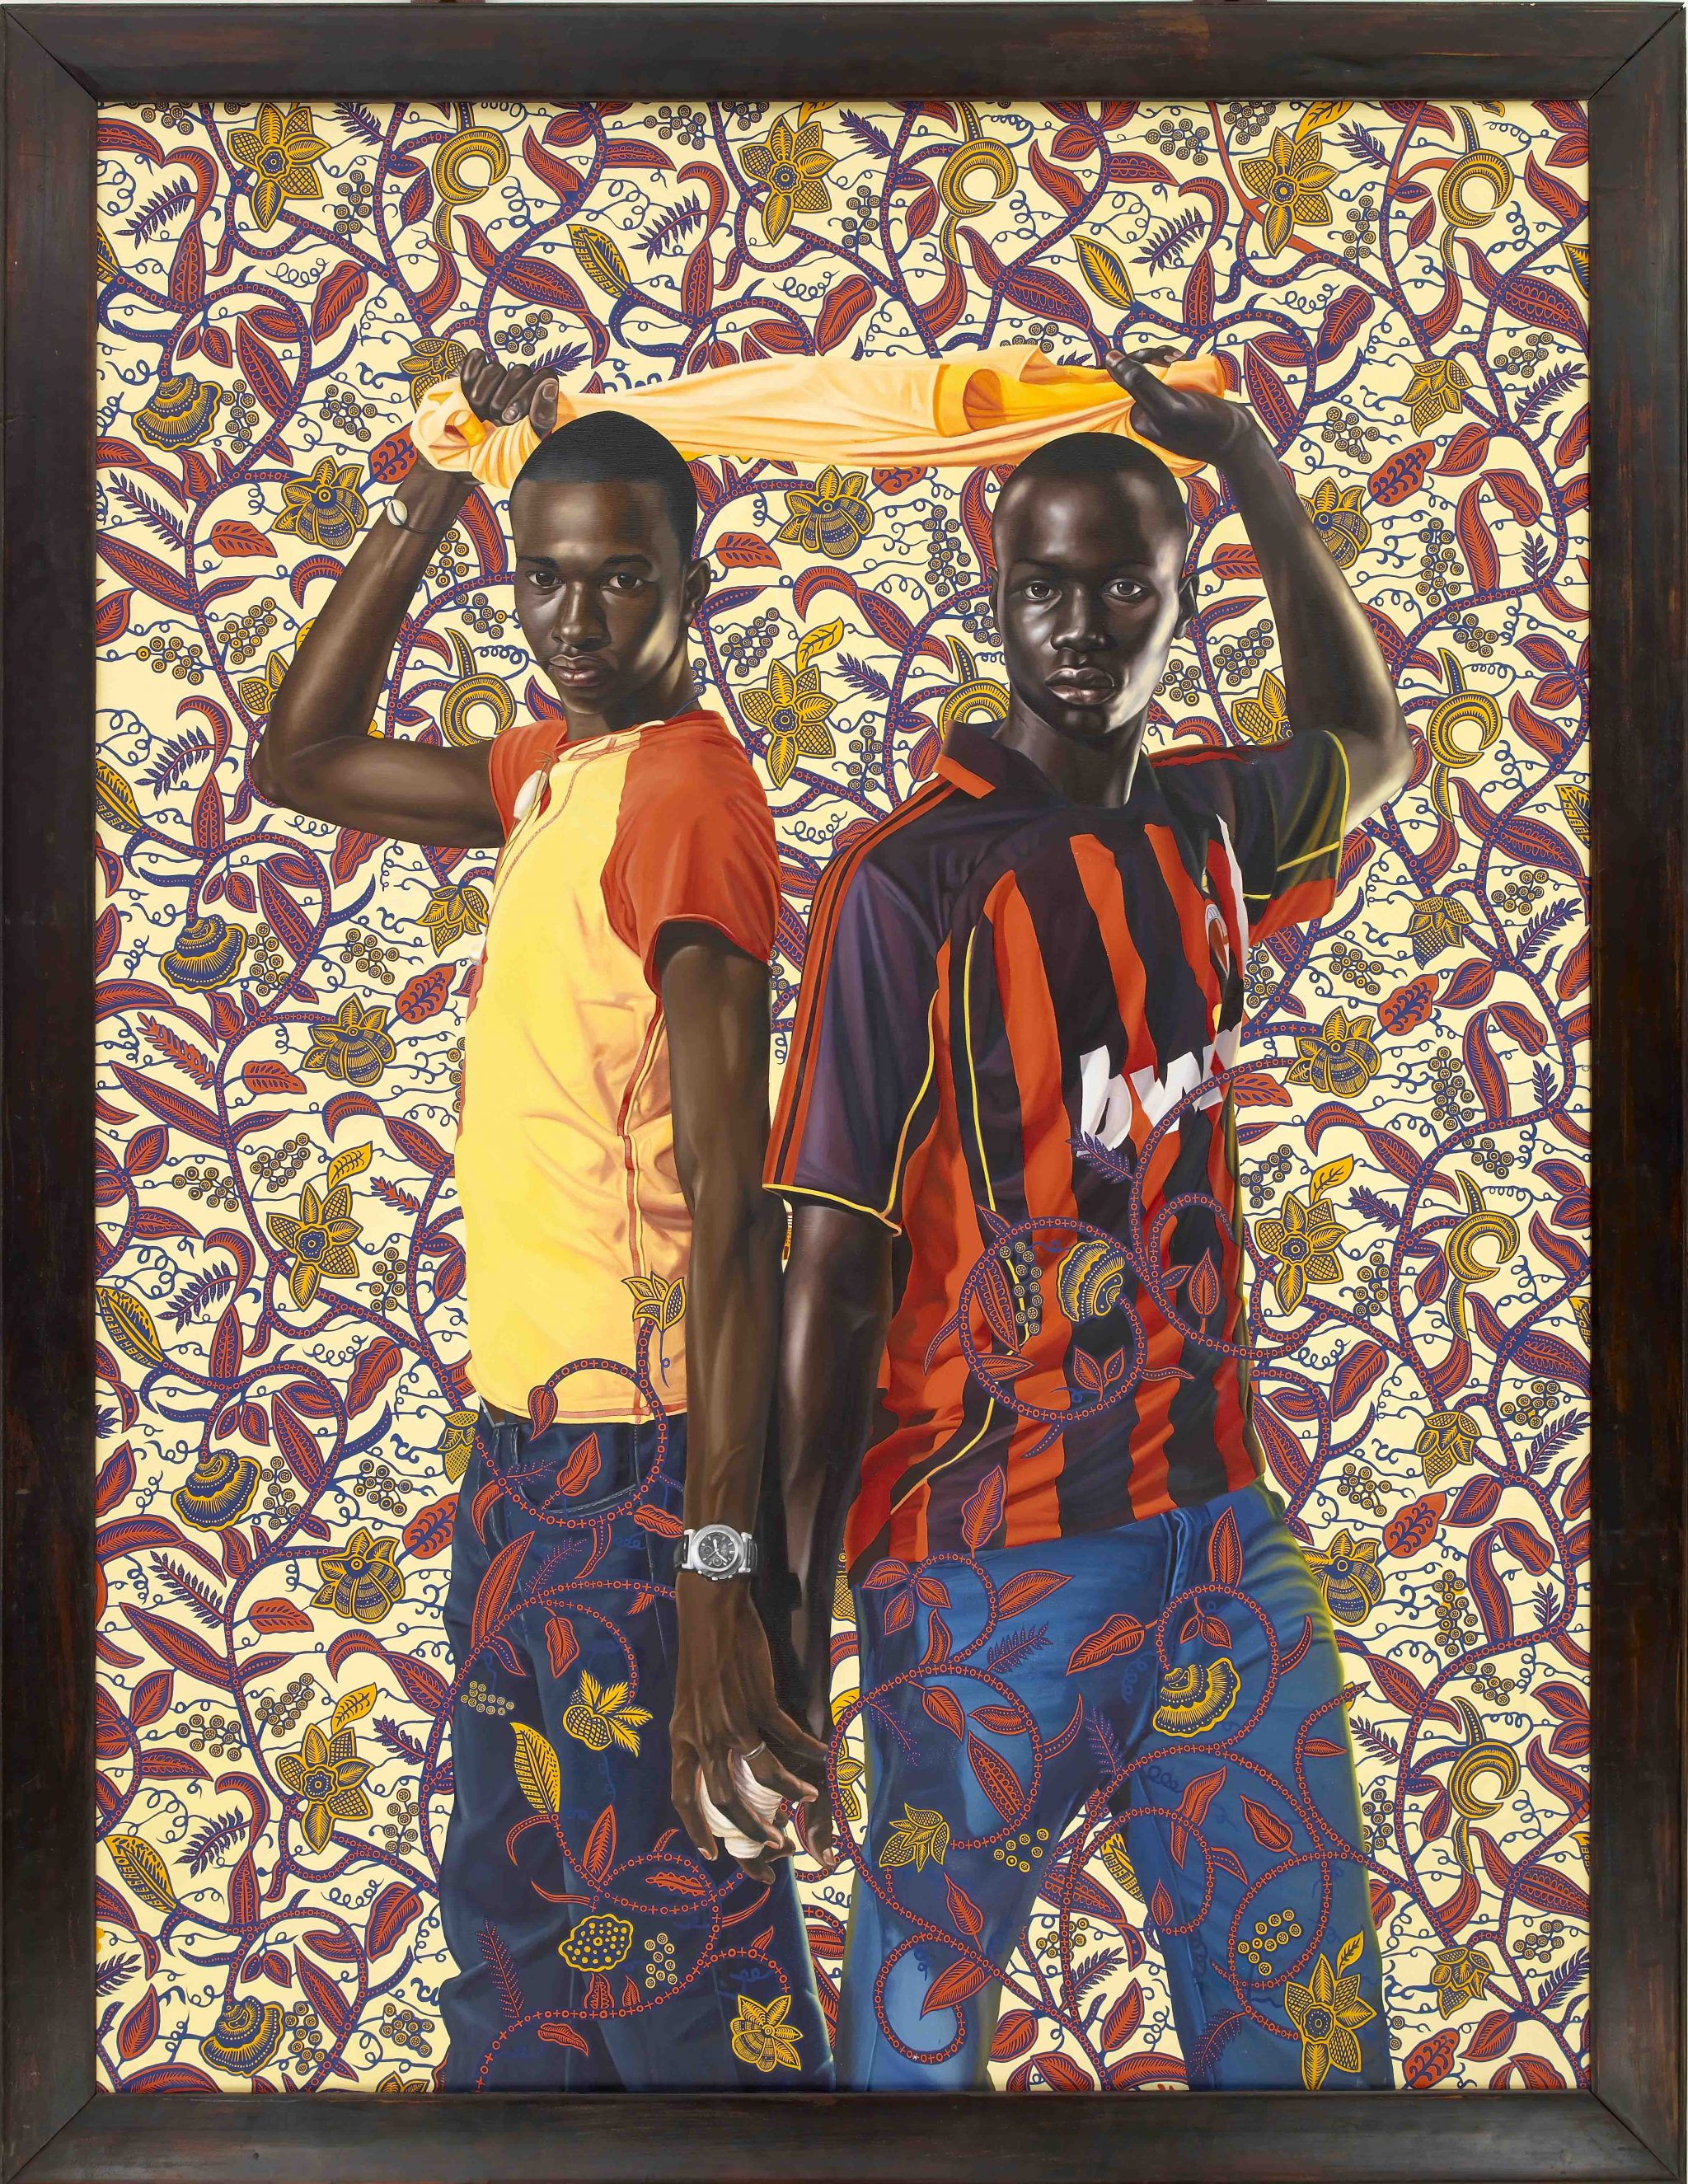 Kehinde Wiley | The World Stage: Africa, Lagos-Dakar, The Studio Museum in Harlem, New York City, USA, July 17 - October 26, 2008 | 4